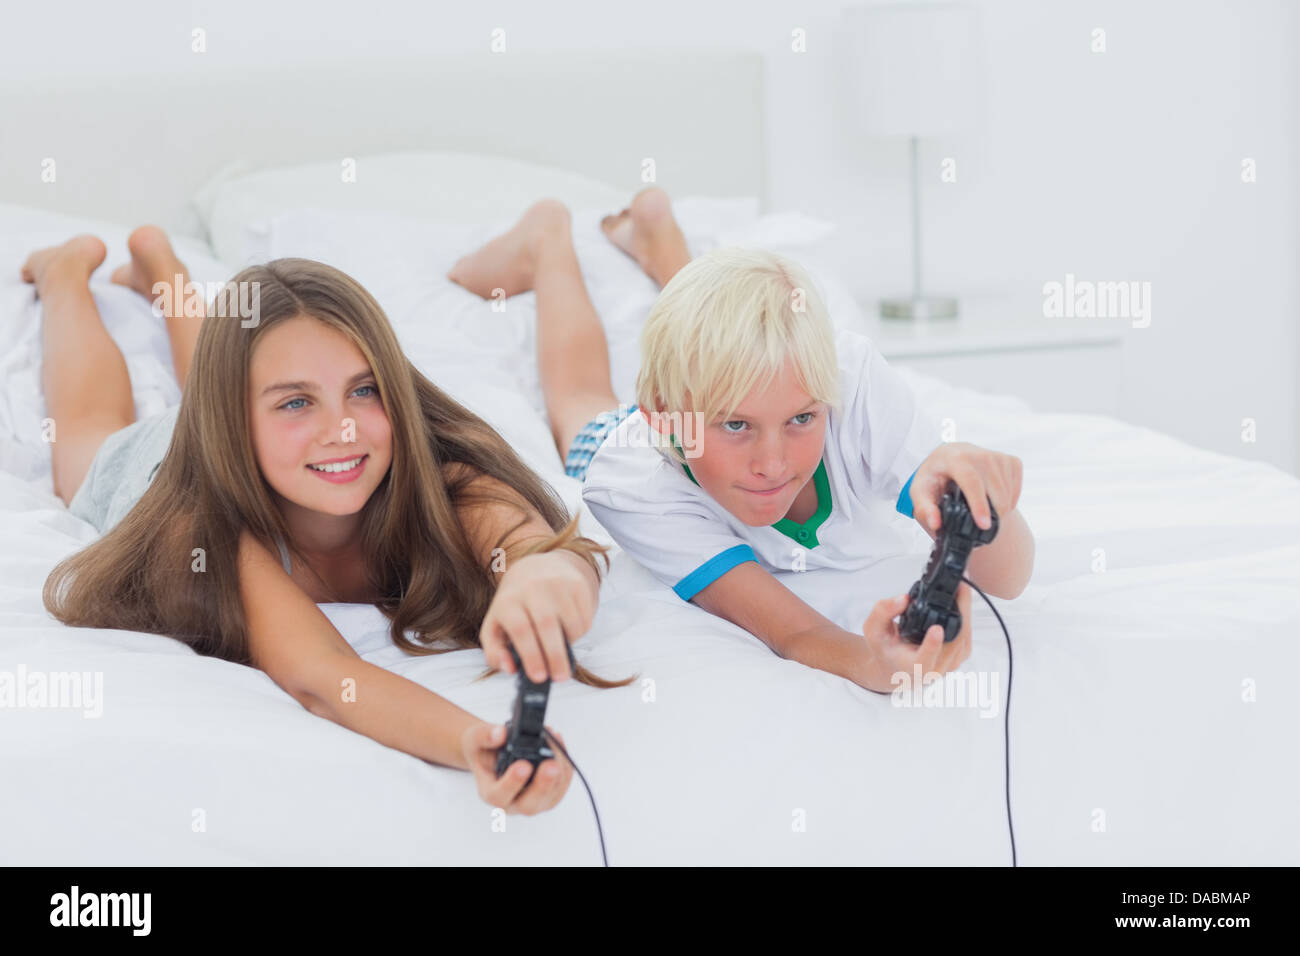 Siblings playing video games Stock Photo